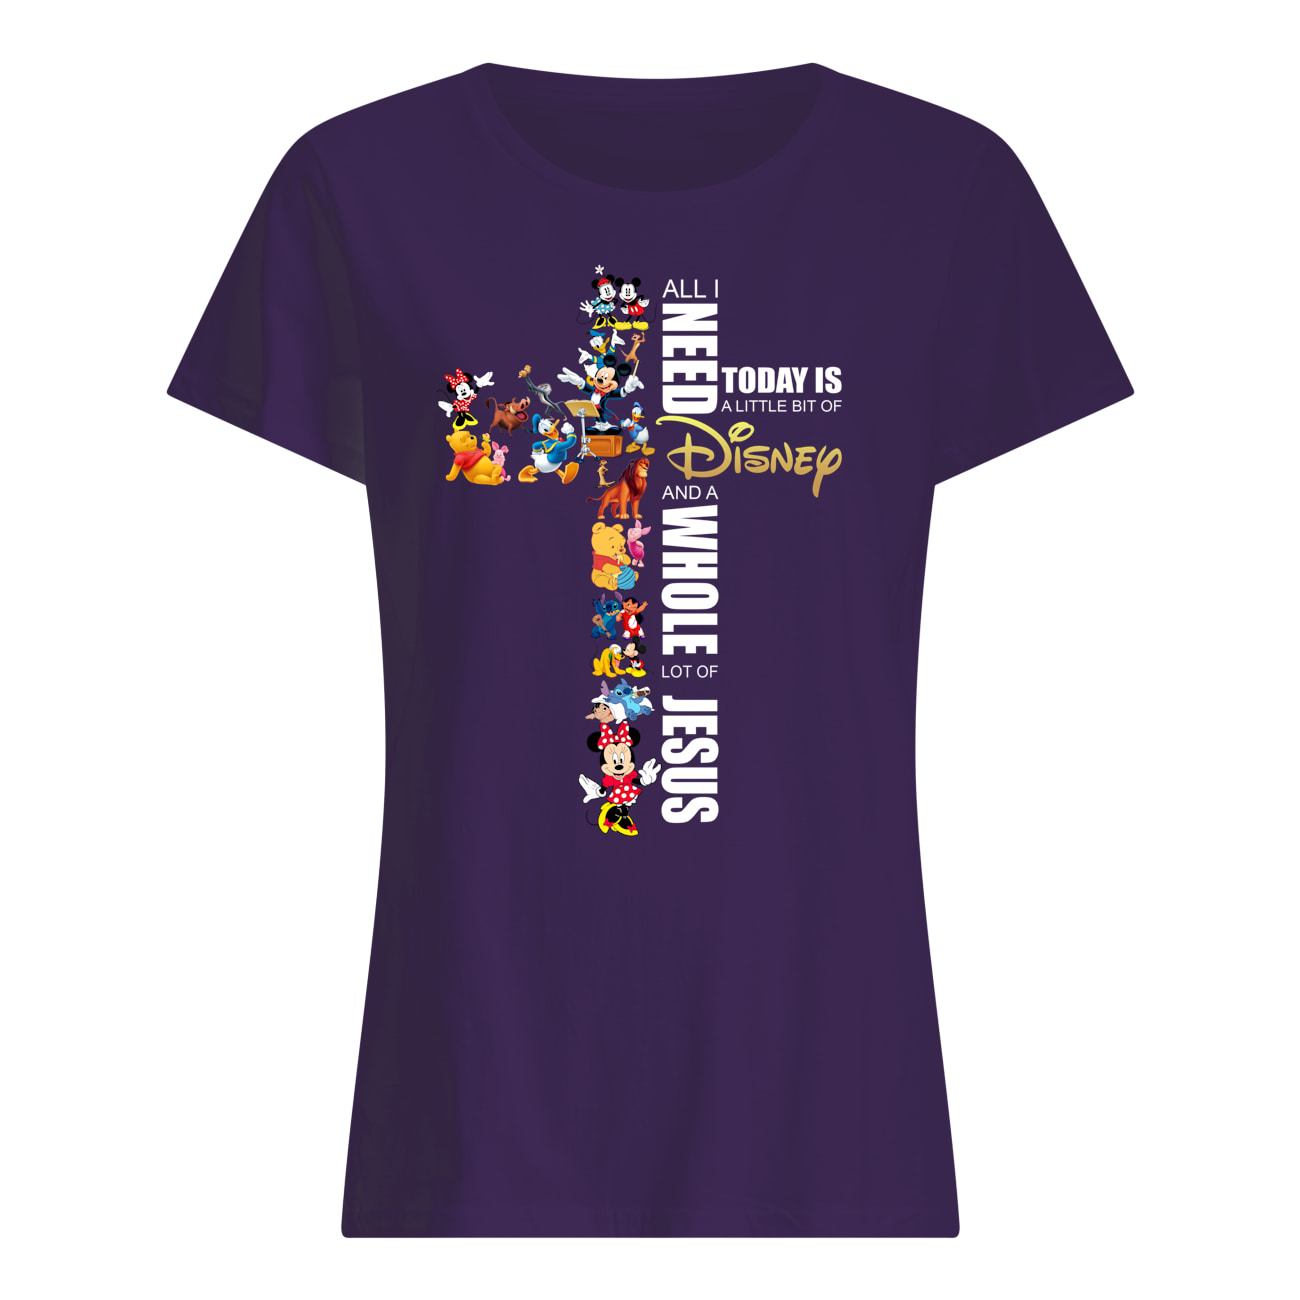 All i need today is a little bit of disney and a whole lot of Jesus womens shirt